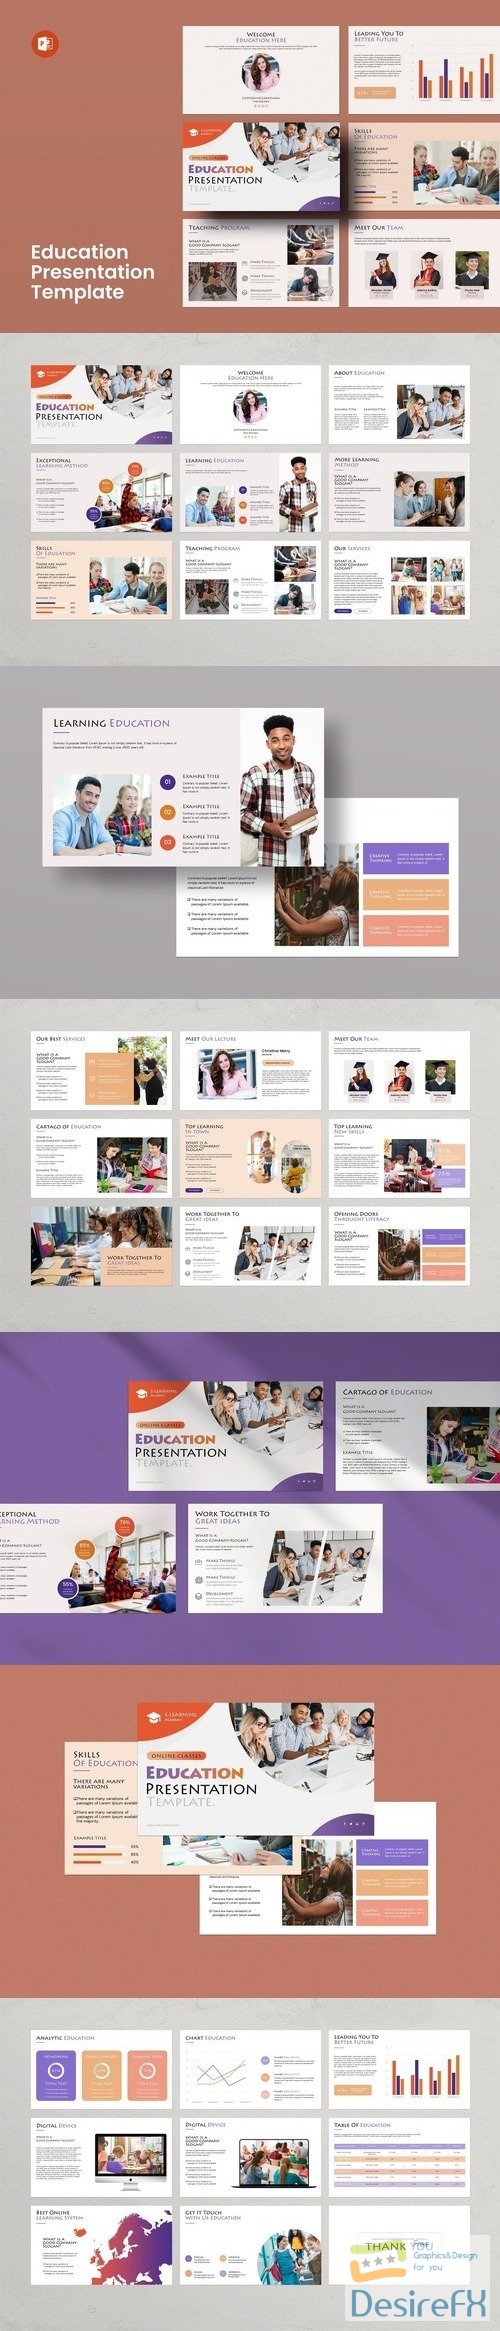 Education - PowerPoint Template